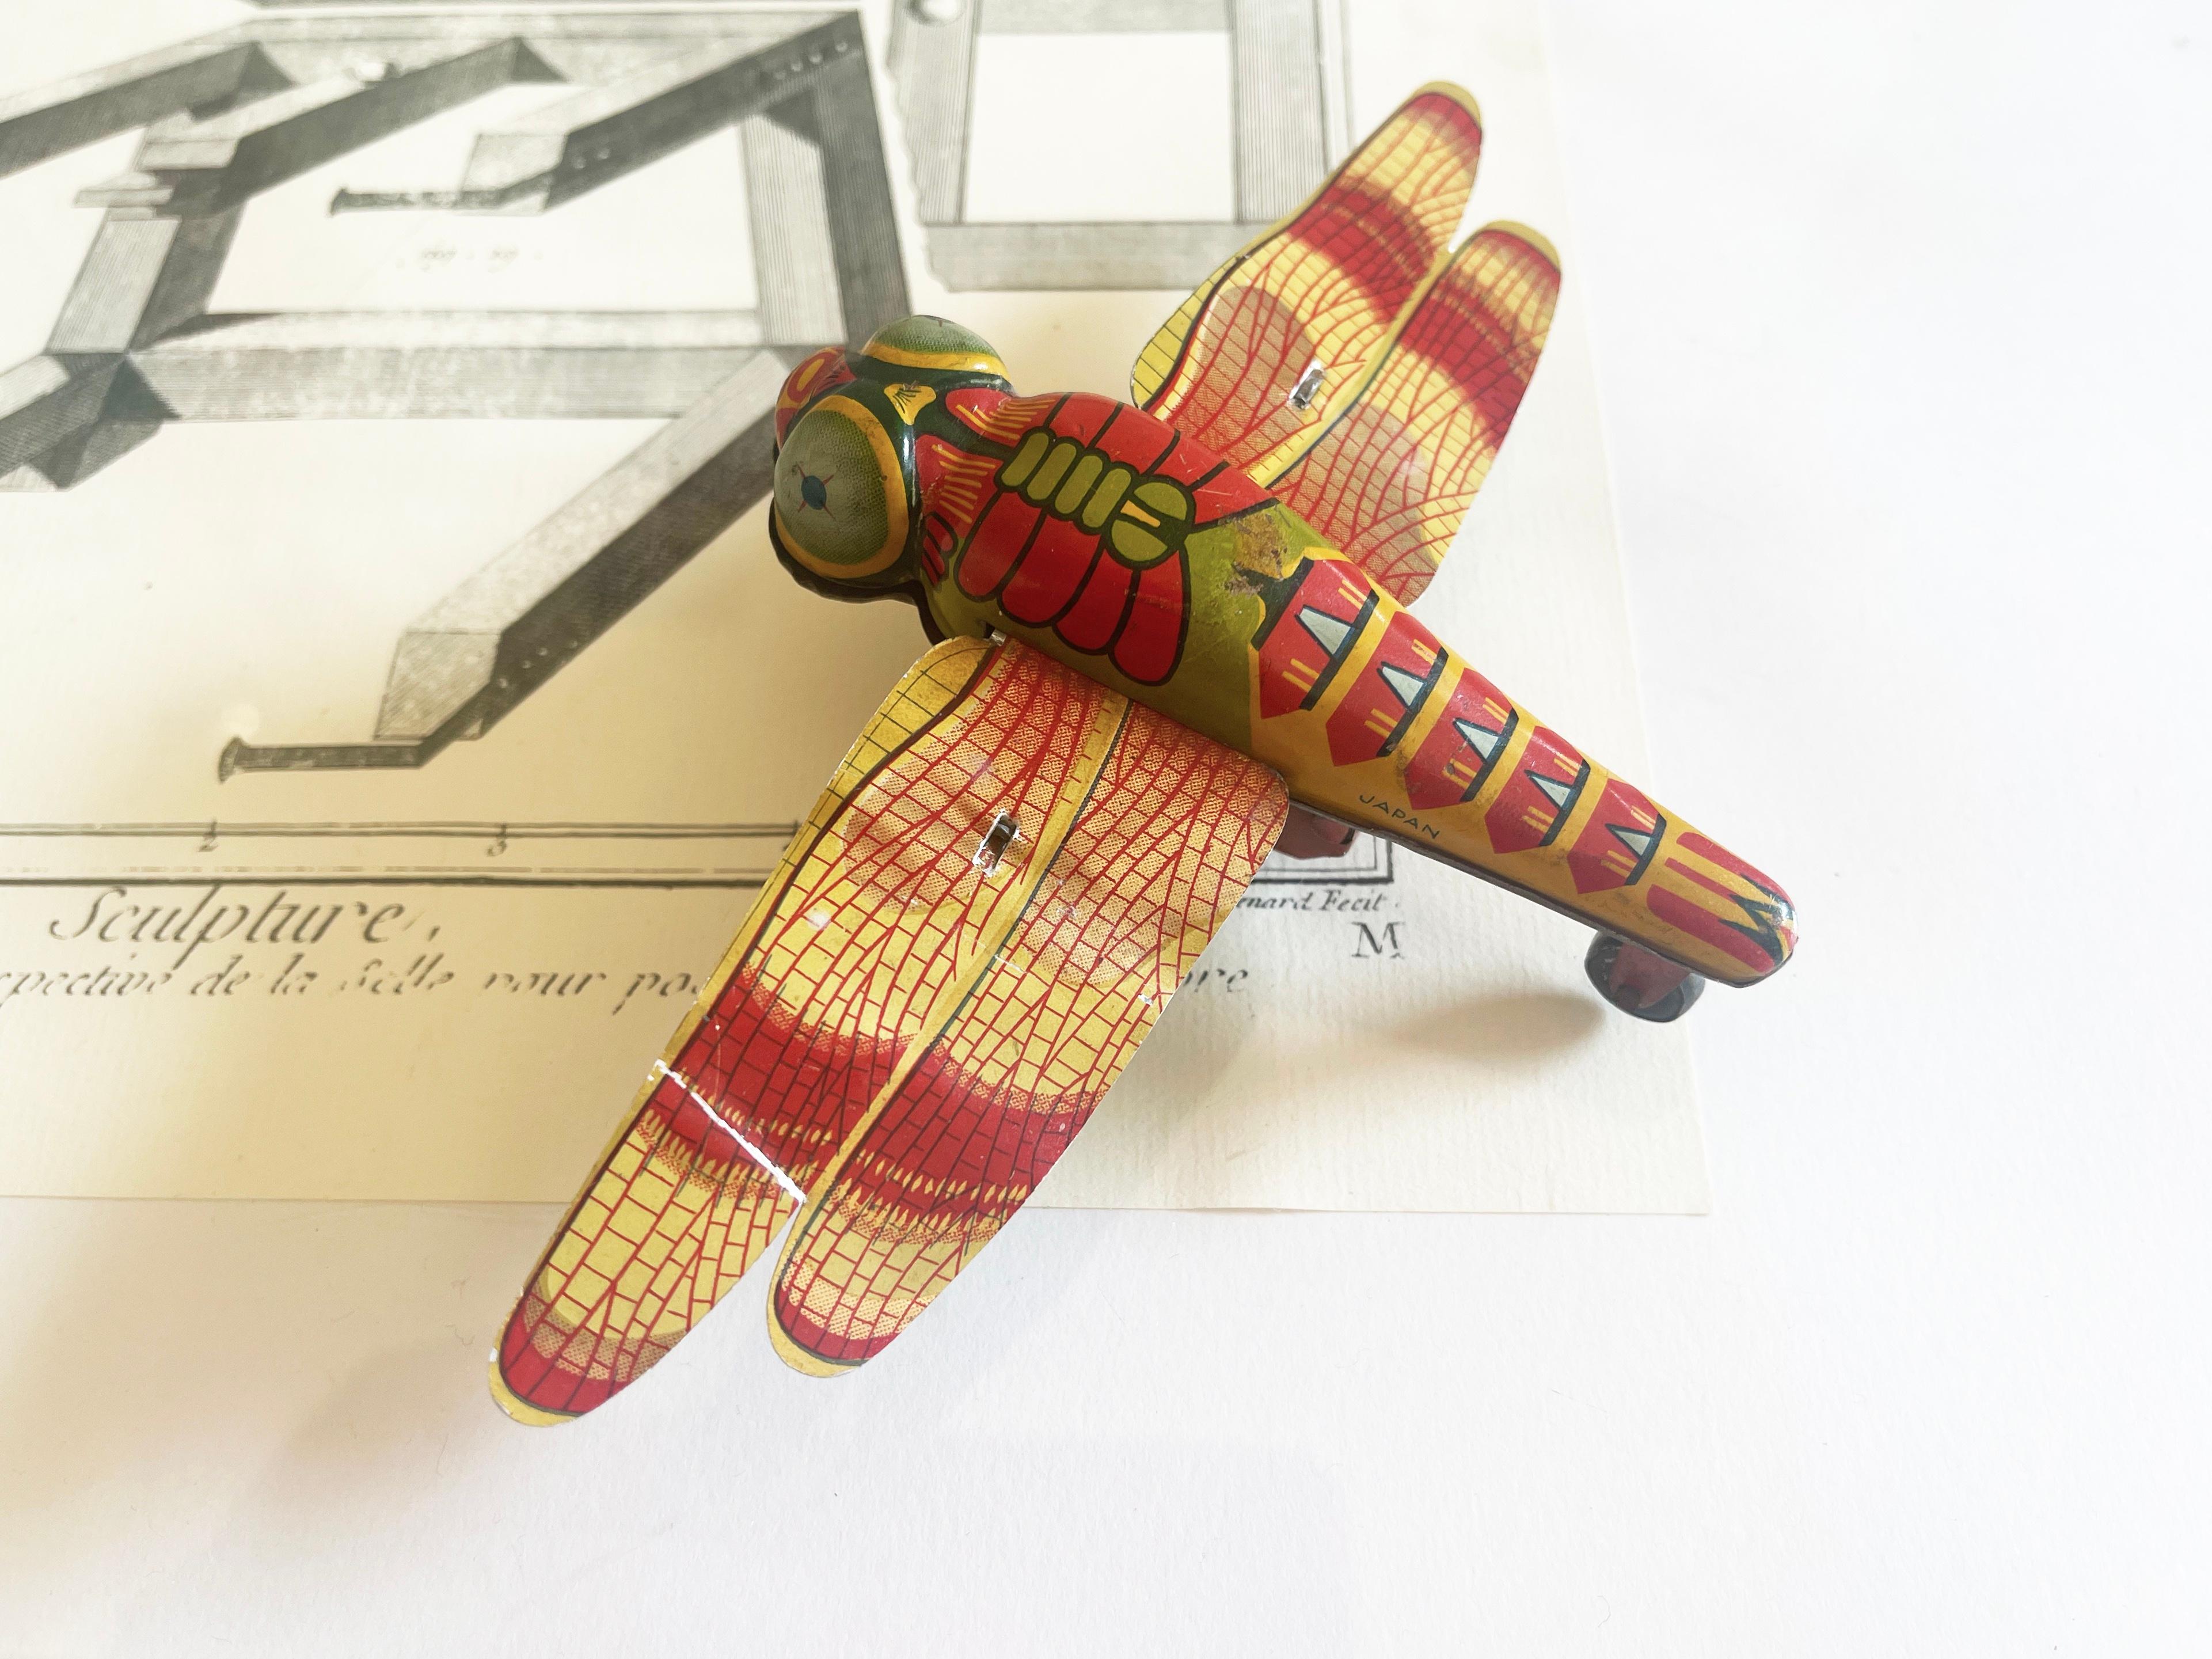 Machine-Made Vintage Japanese Litho Wind-up Tin Toy Dragonfly 1940's to 1950's, Japan